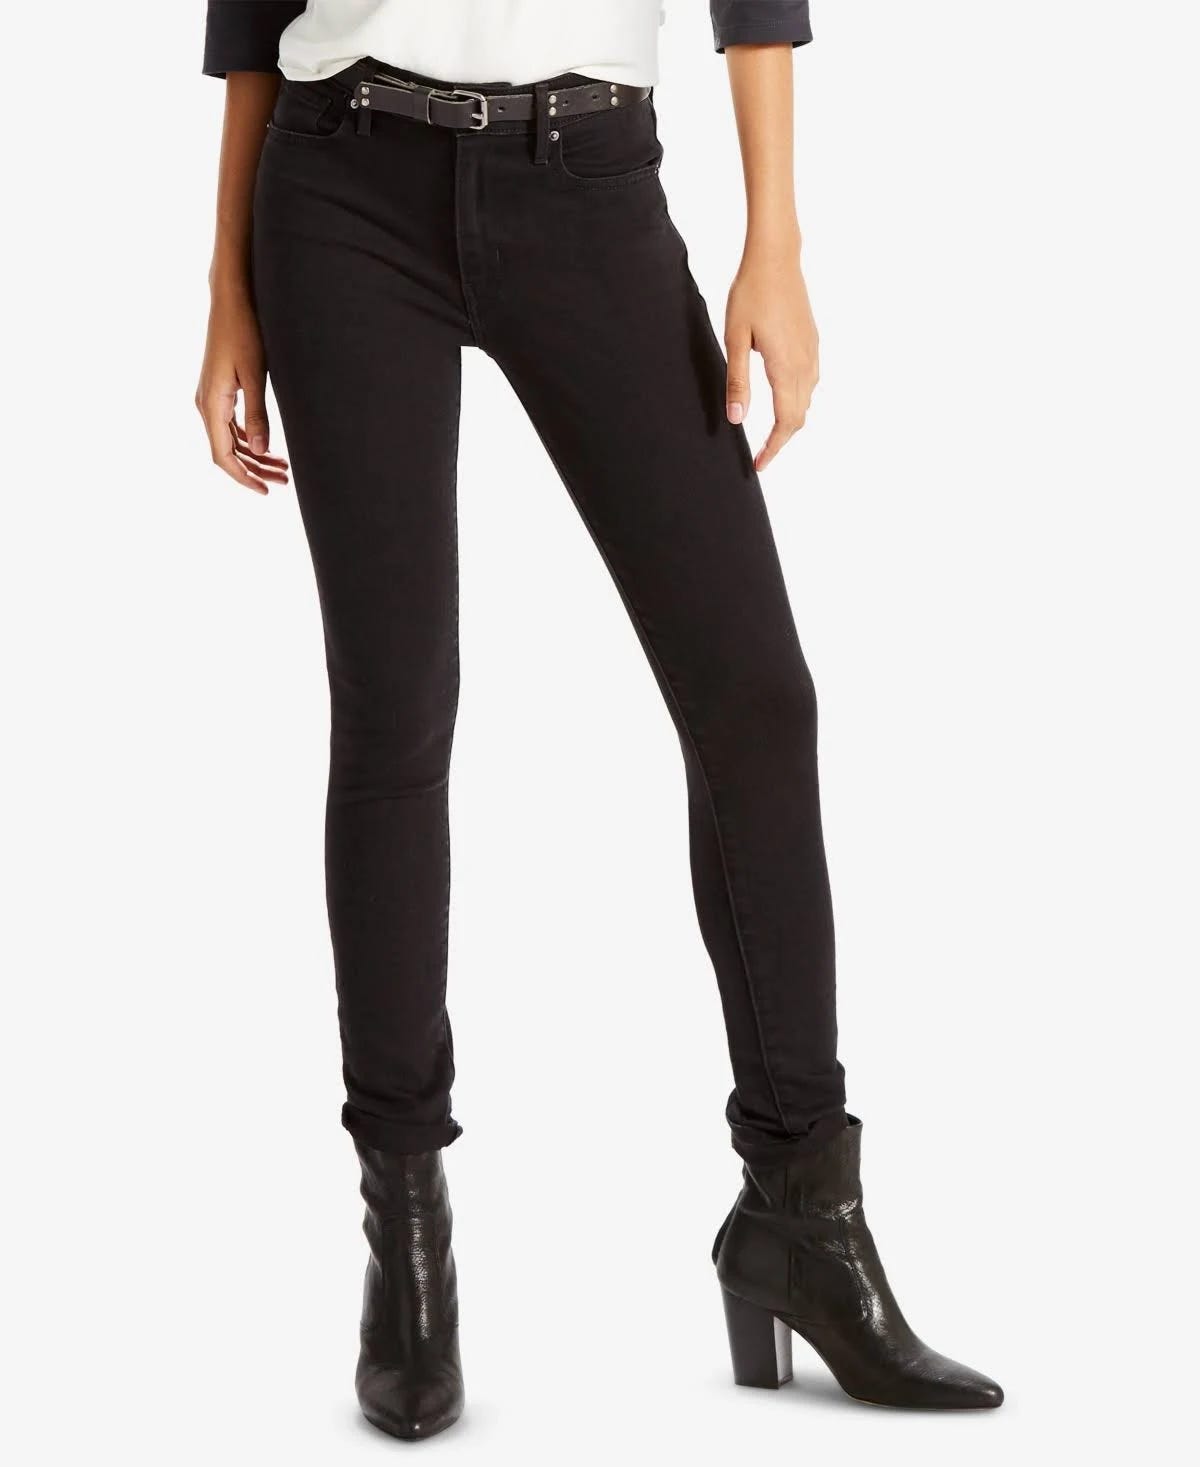 Levi's Black High-Rise Skinny Jeans: Stylish, Slim, and Fits True to Size | Image